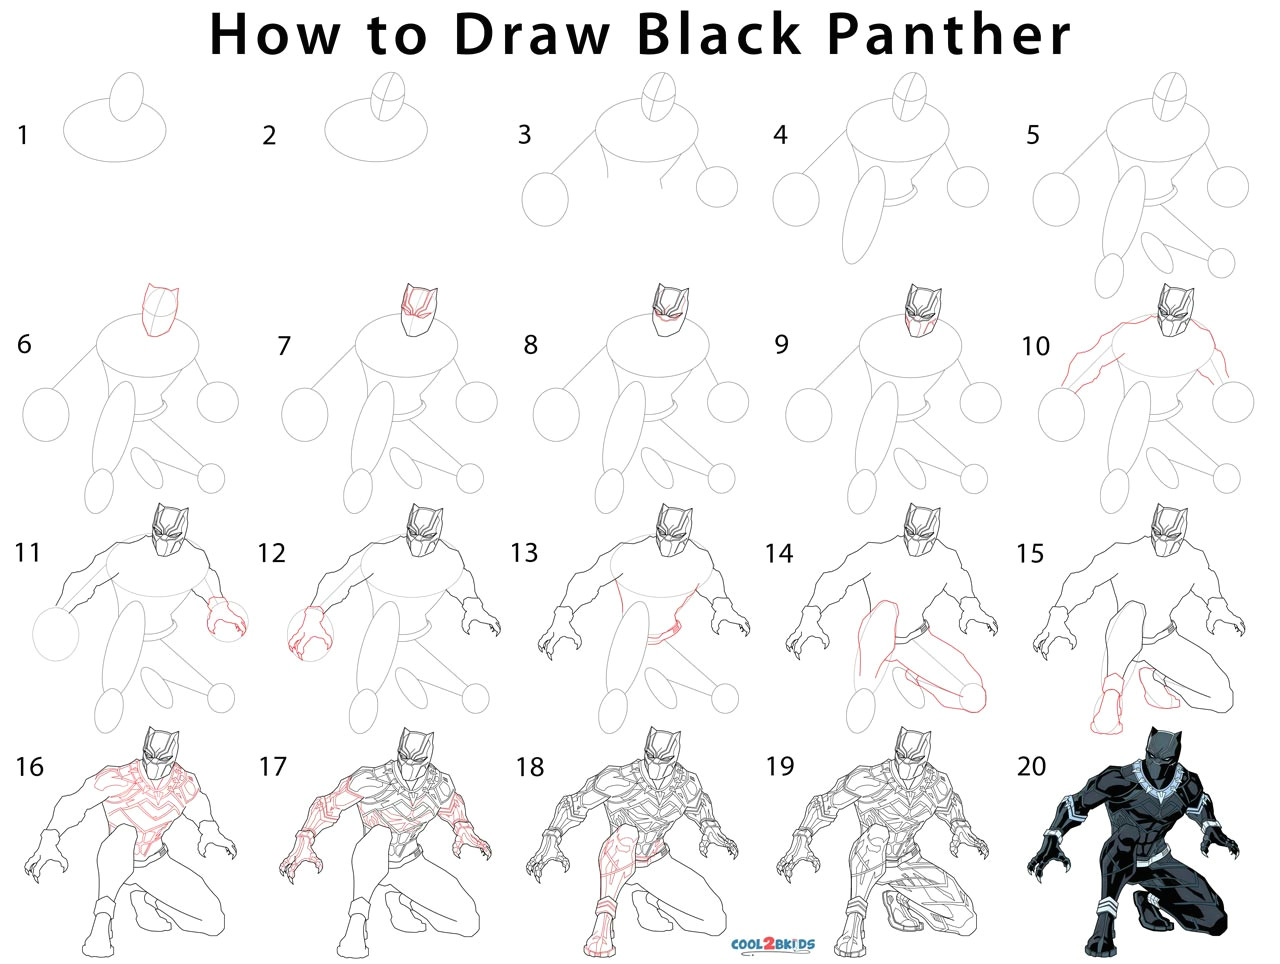 how to draw black panther step by step jpg